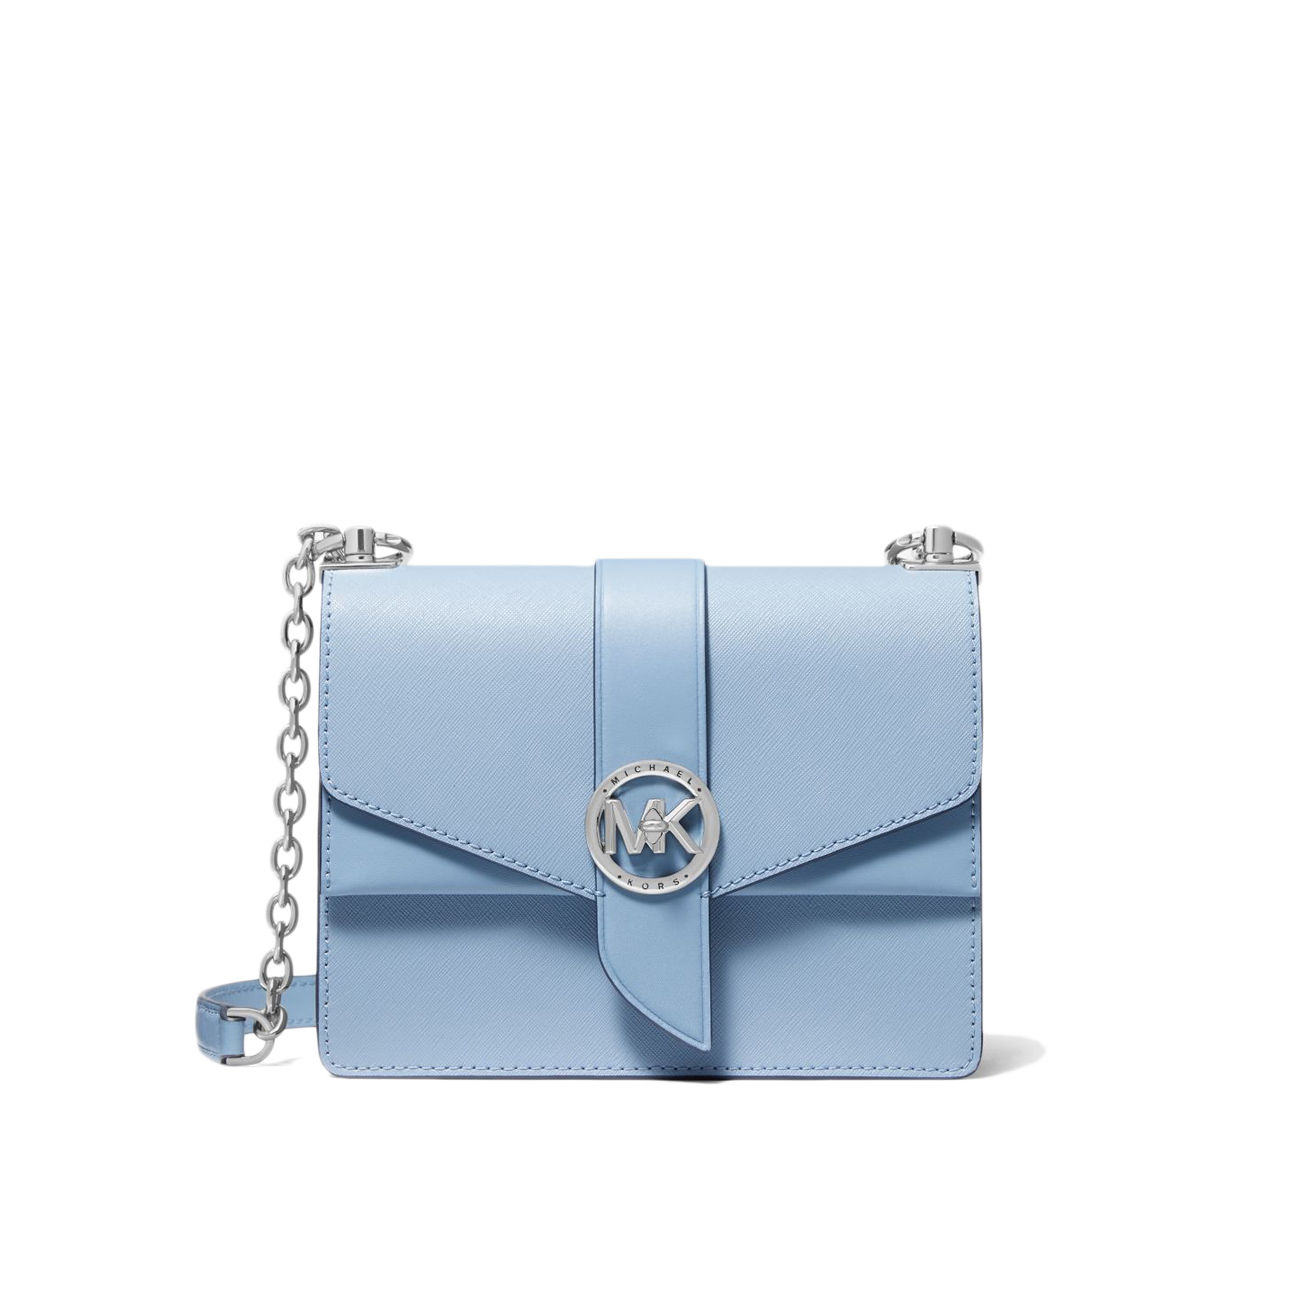 MICHAEL KORS GREENWICH CROSSBODY IN SAFFIANO LEATHER Woman Chambray